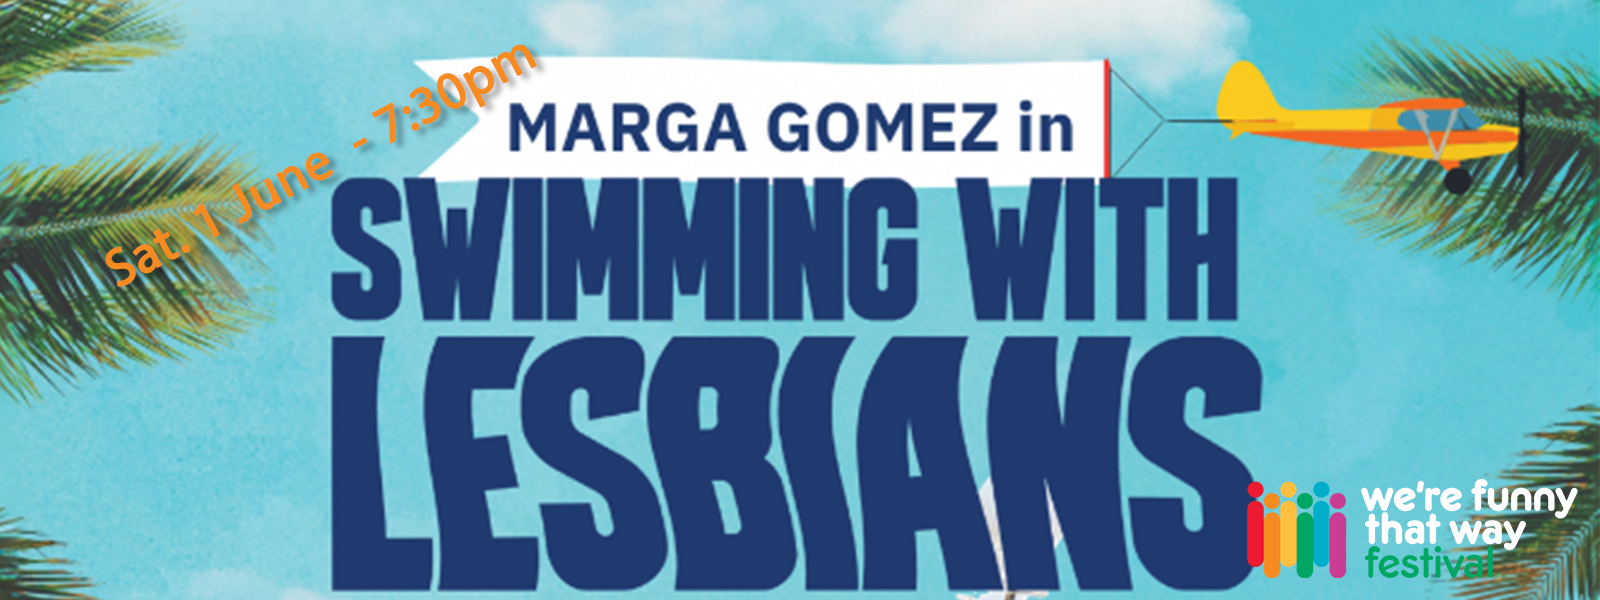 Marga Gomez in “Swimming with Lesbians”! show poster